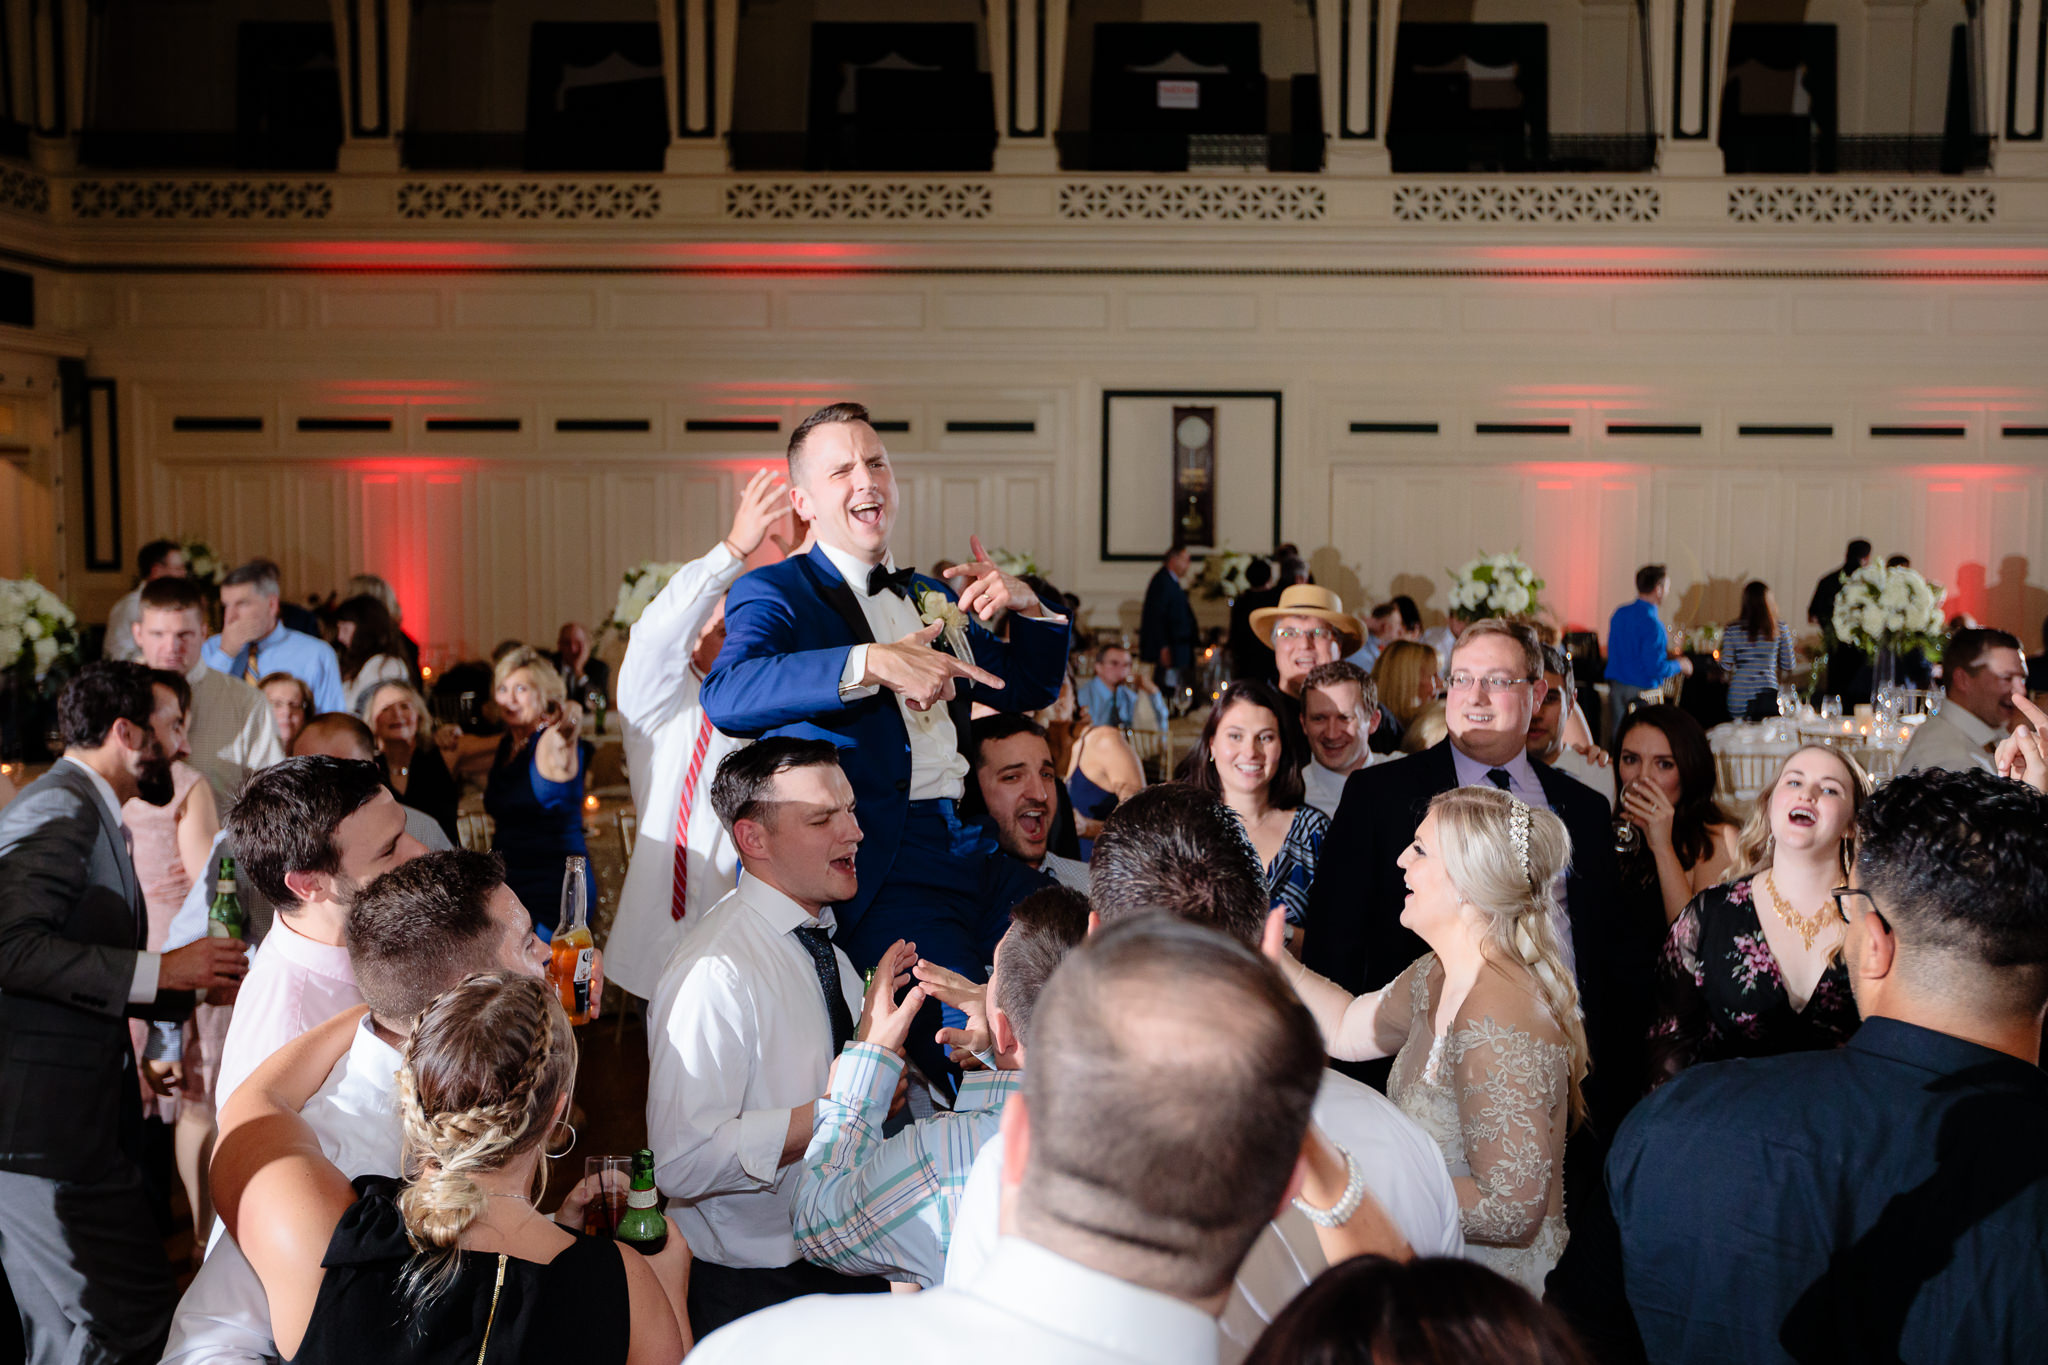 Guests lift the groom on their shoulders at Soldiers & Sailors Memorial Hall